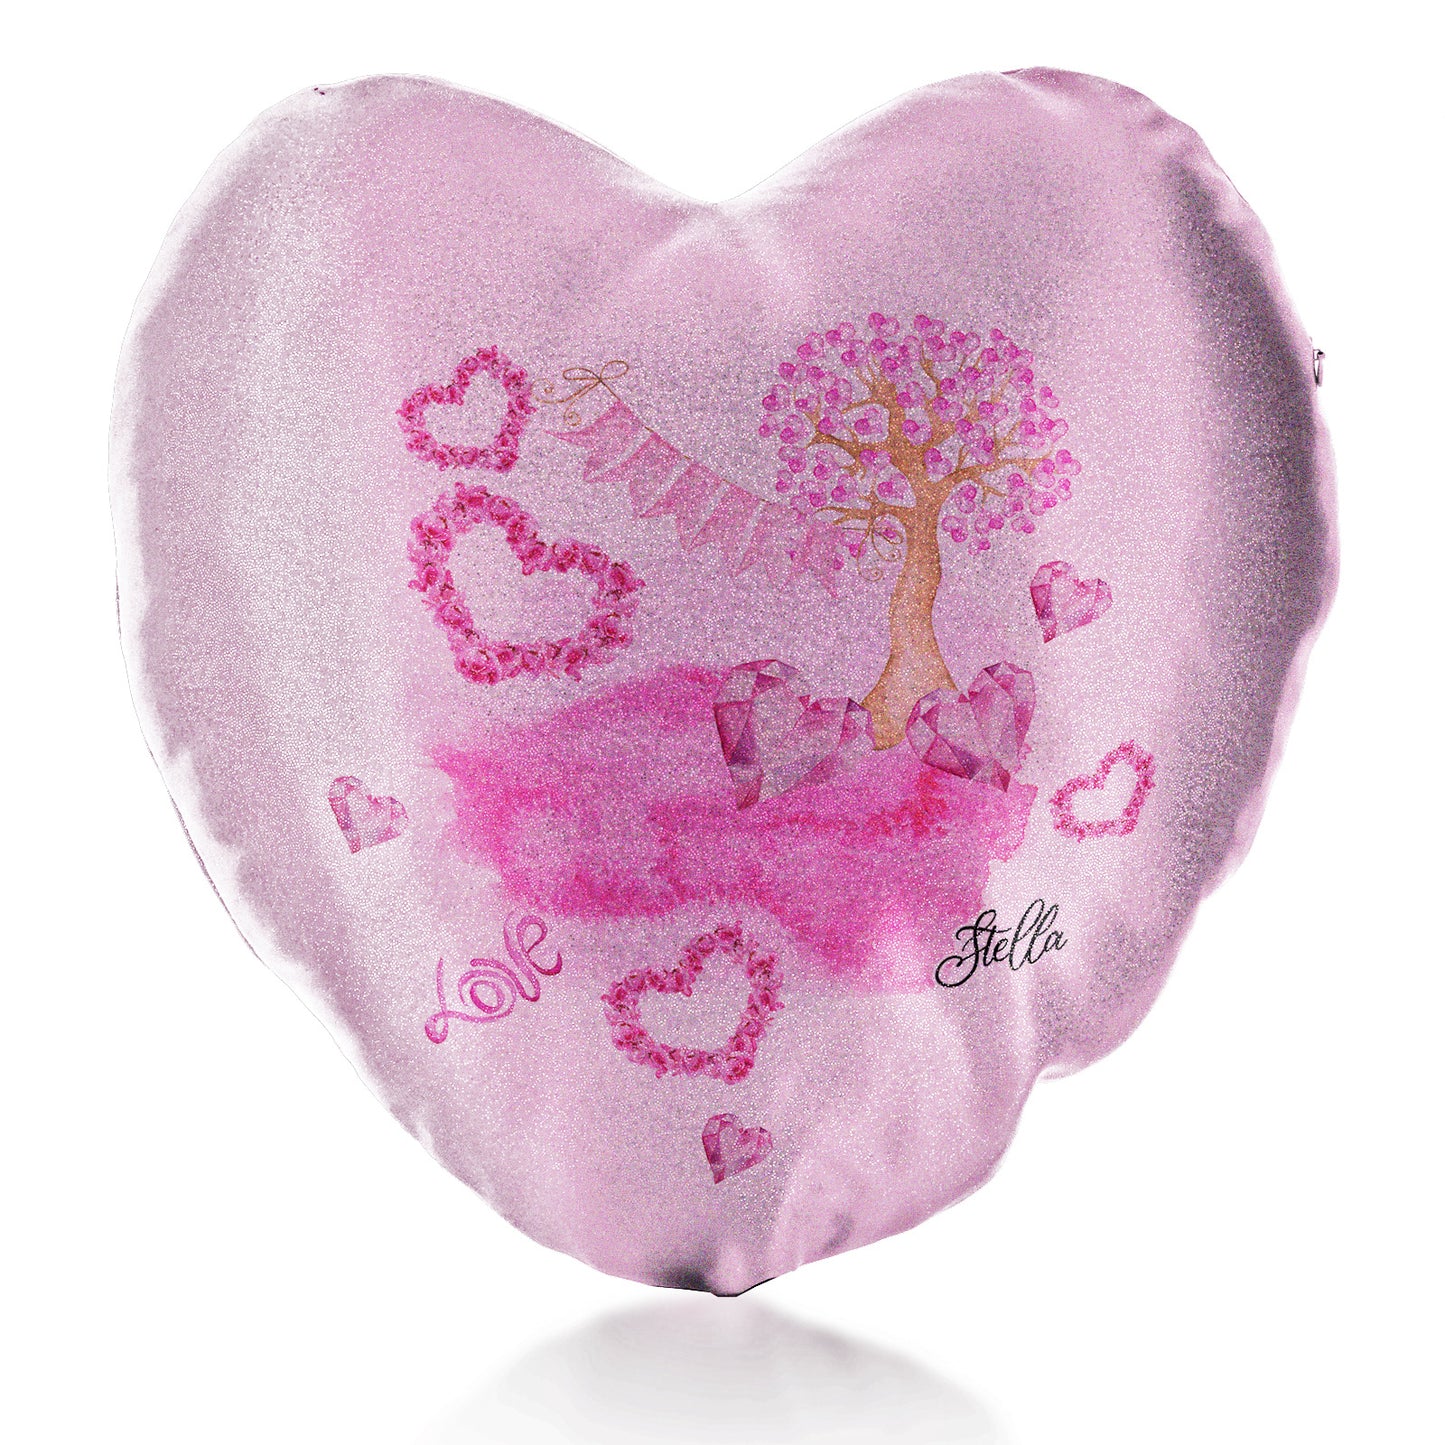 Personalised Glitter Heart Cushion with Stylish Text and Pink Love Landscape Print